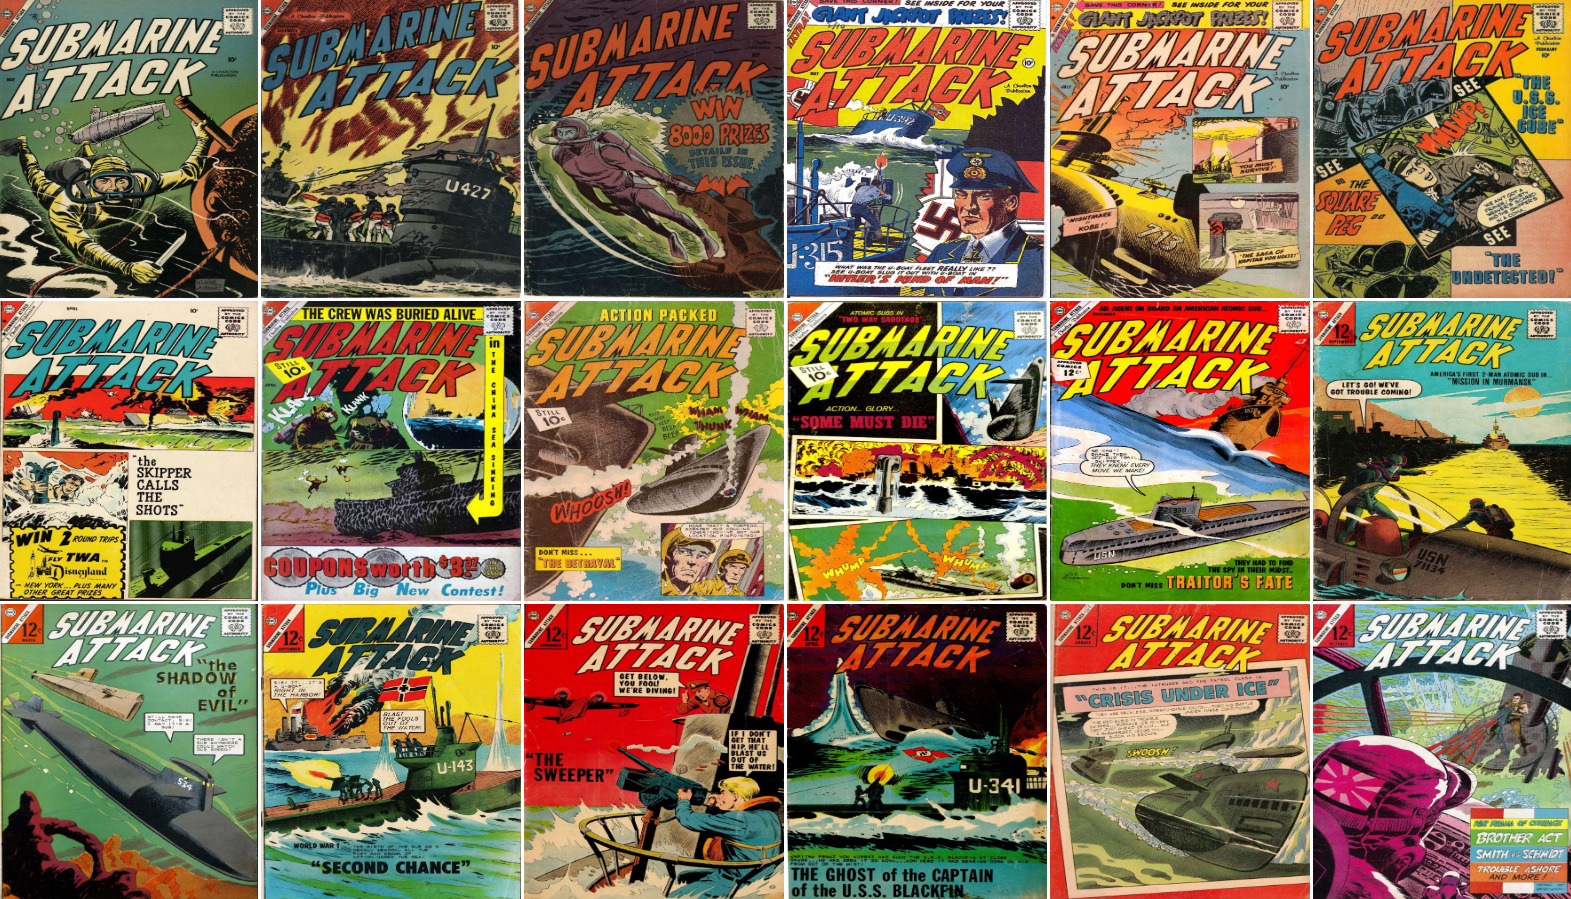 1958 - 1965 Submarine Attack Comic Book Package - 18 eBooks on CD